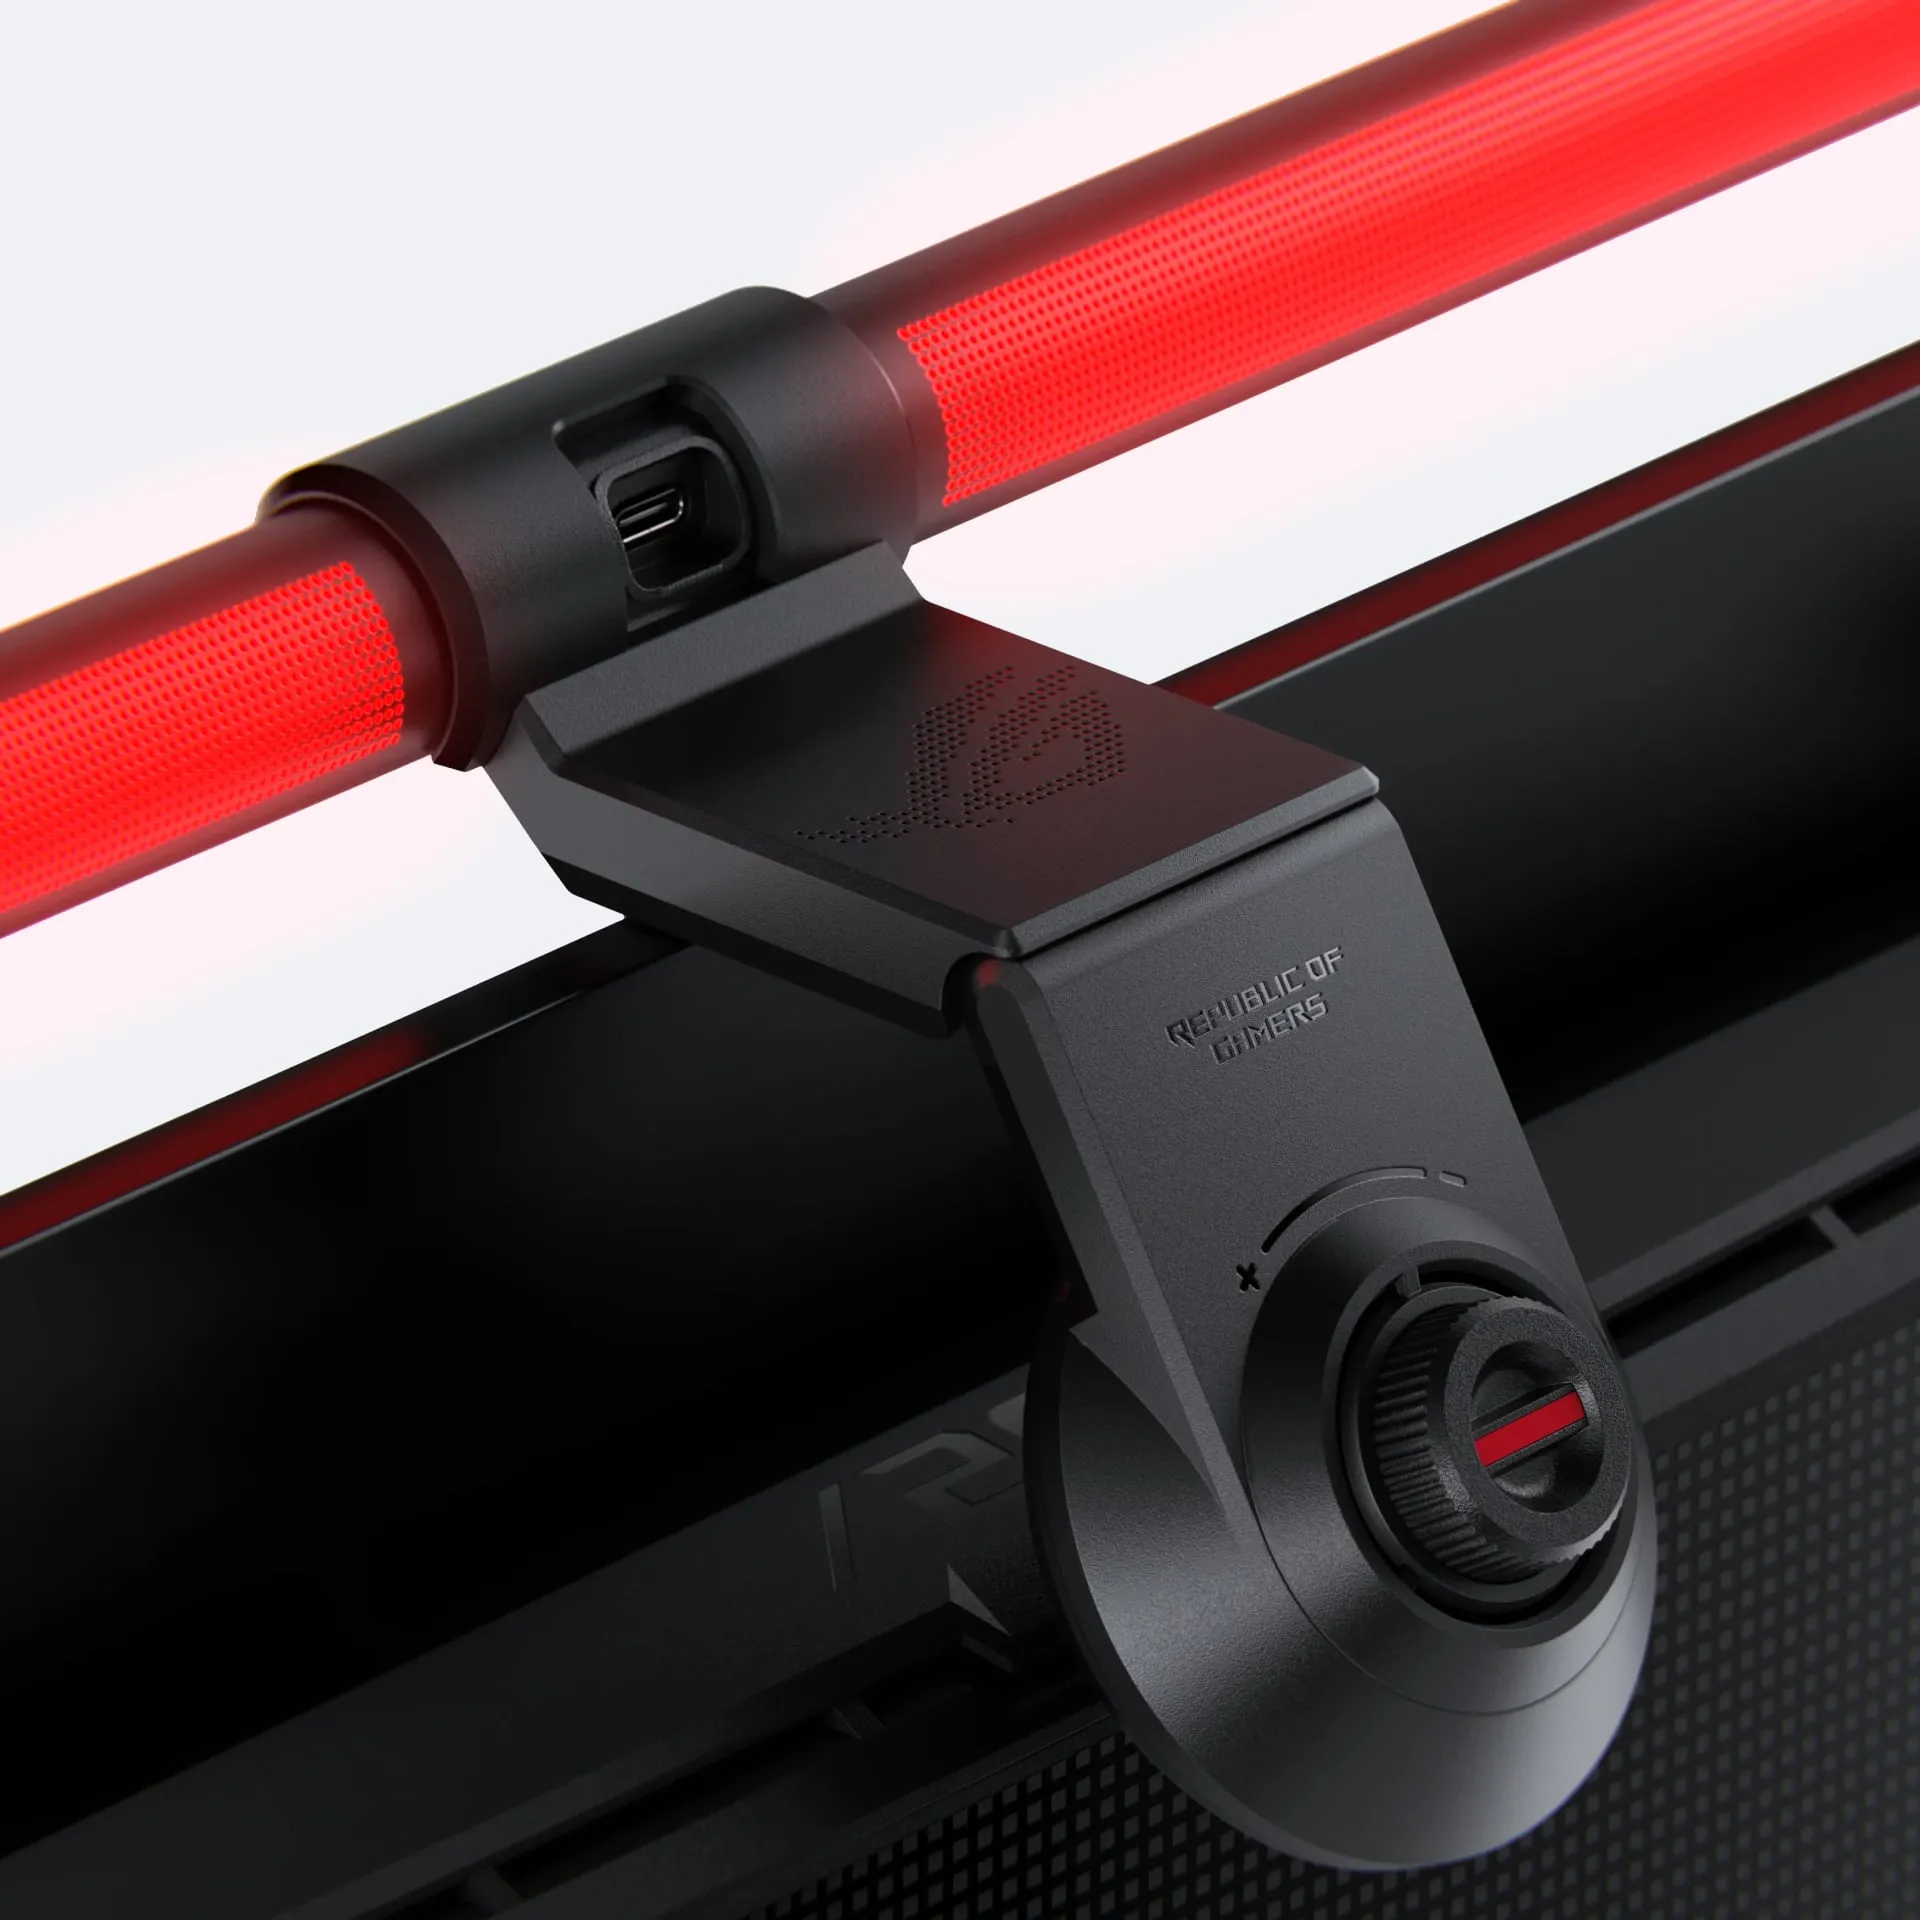 The ROG Monitor Light  Bar also includes a USB-C port.